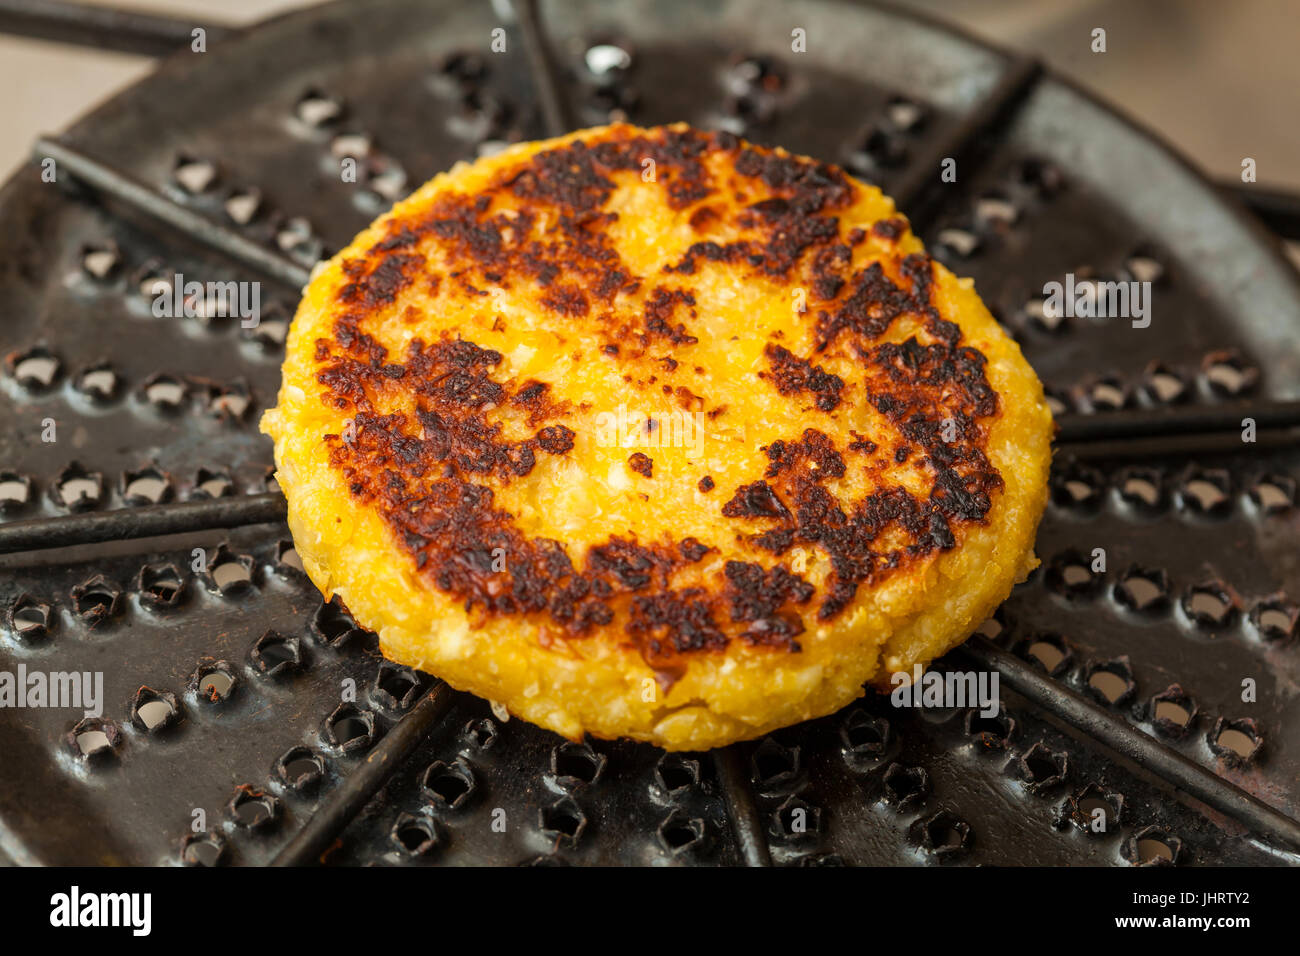 https://c8.alamy.com/comp/JHRTY2/traditional-colombian-arepa-de-choclo-preparation-corn-bread-being-JHRTY2.jpg